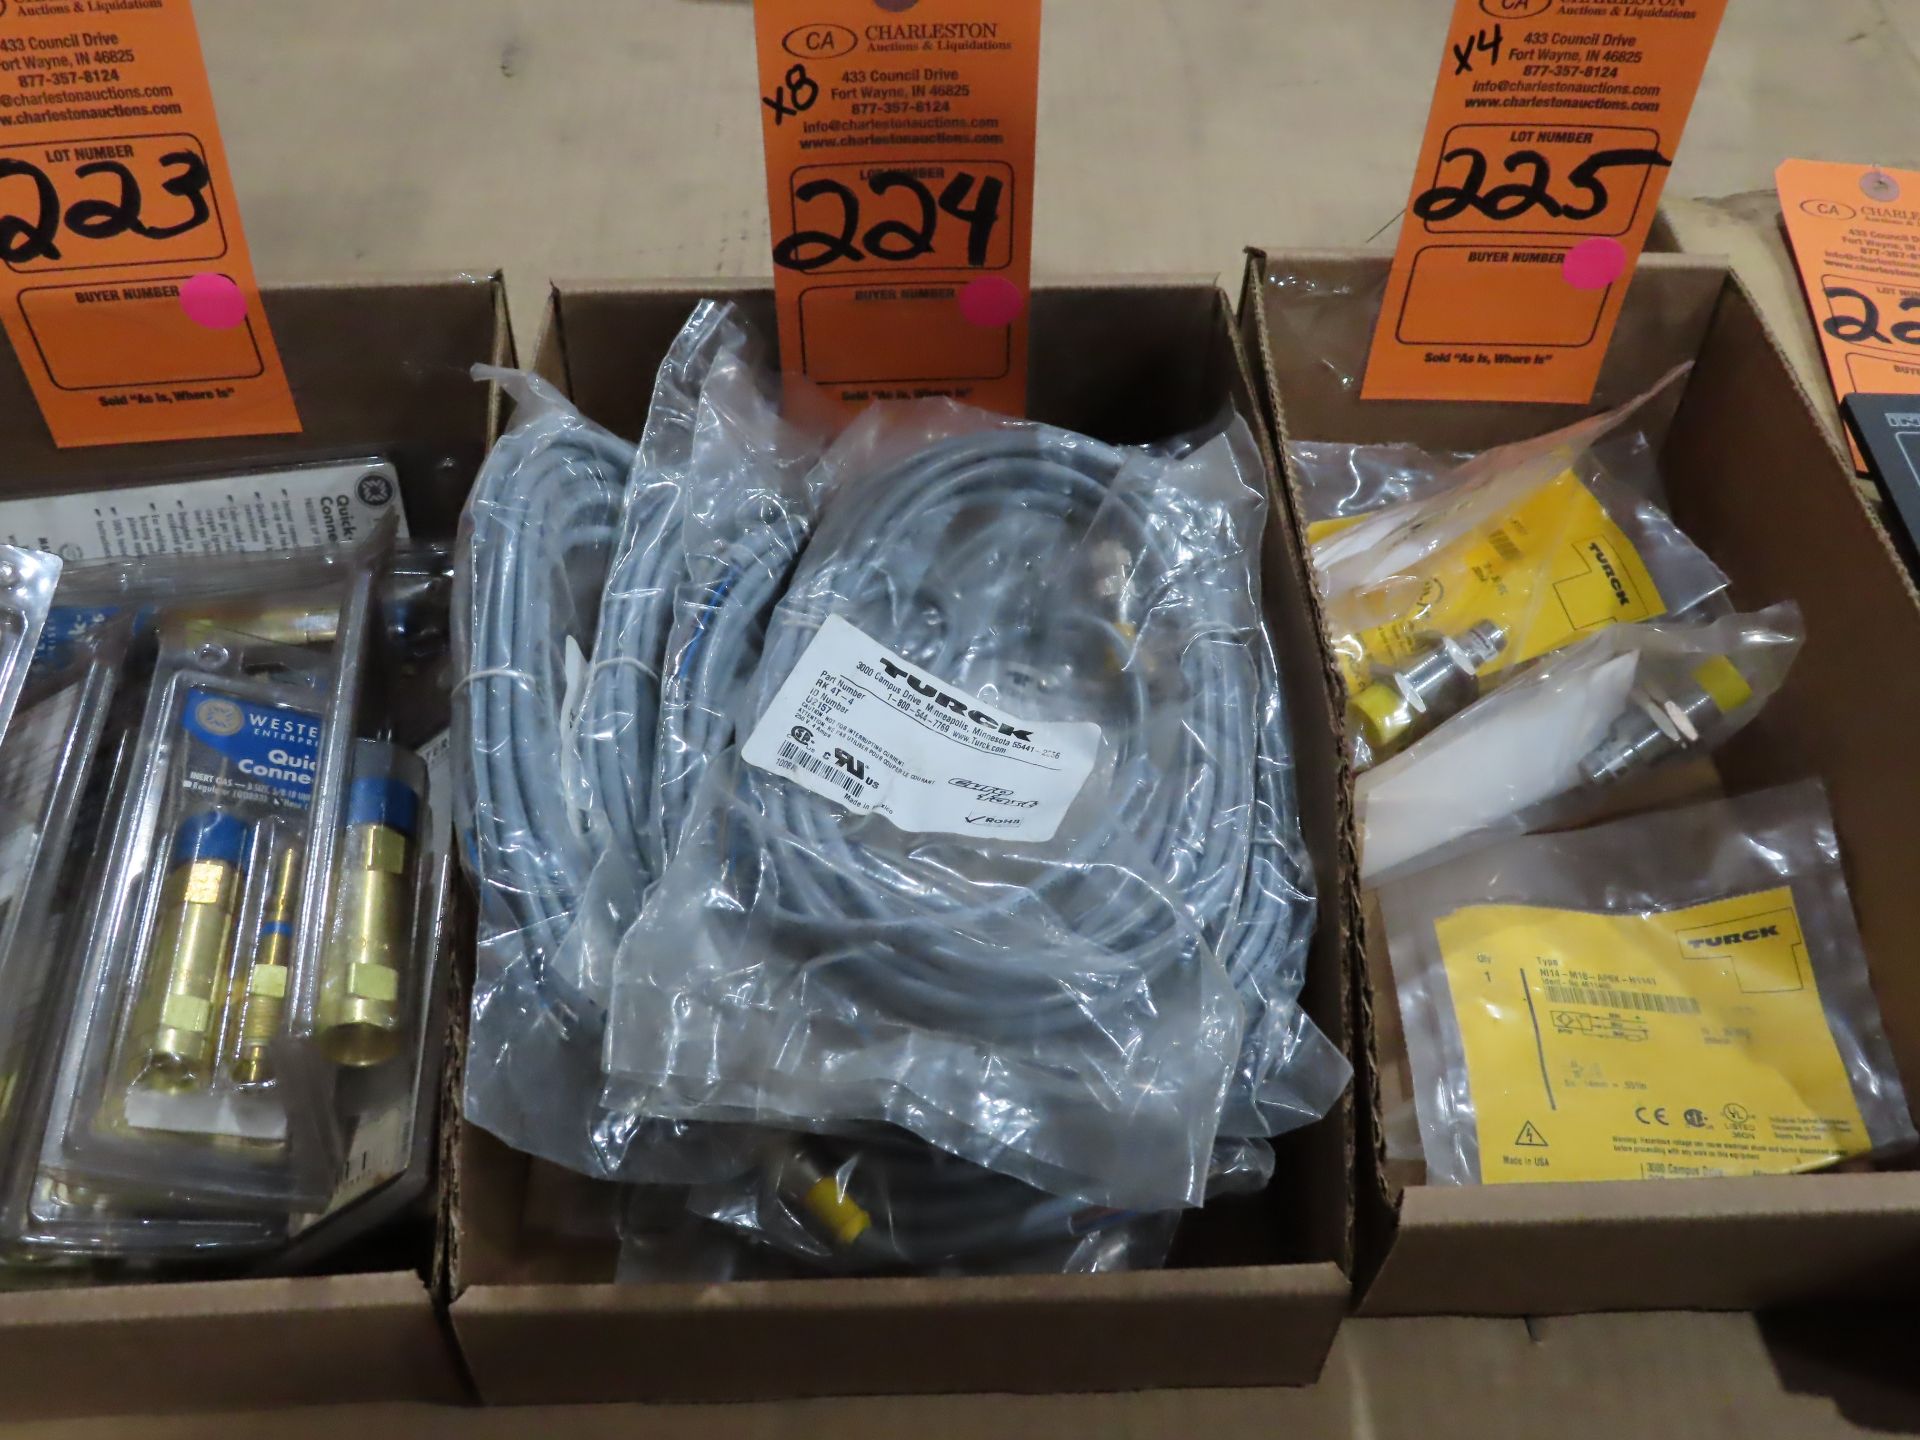 Qty 8 Turck model RK4T-4, new in packages, as always with Brolyn LLC auctions, all lots can be